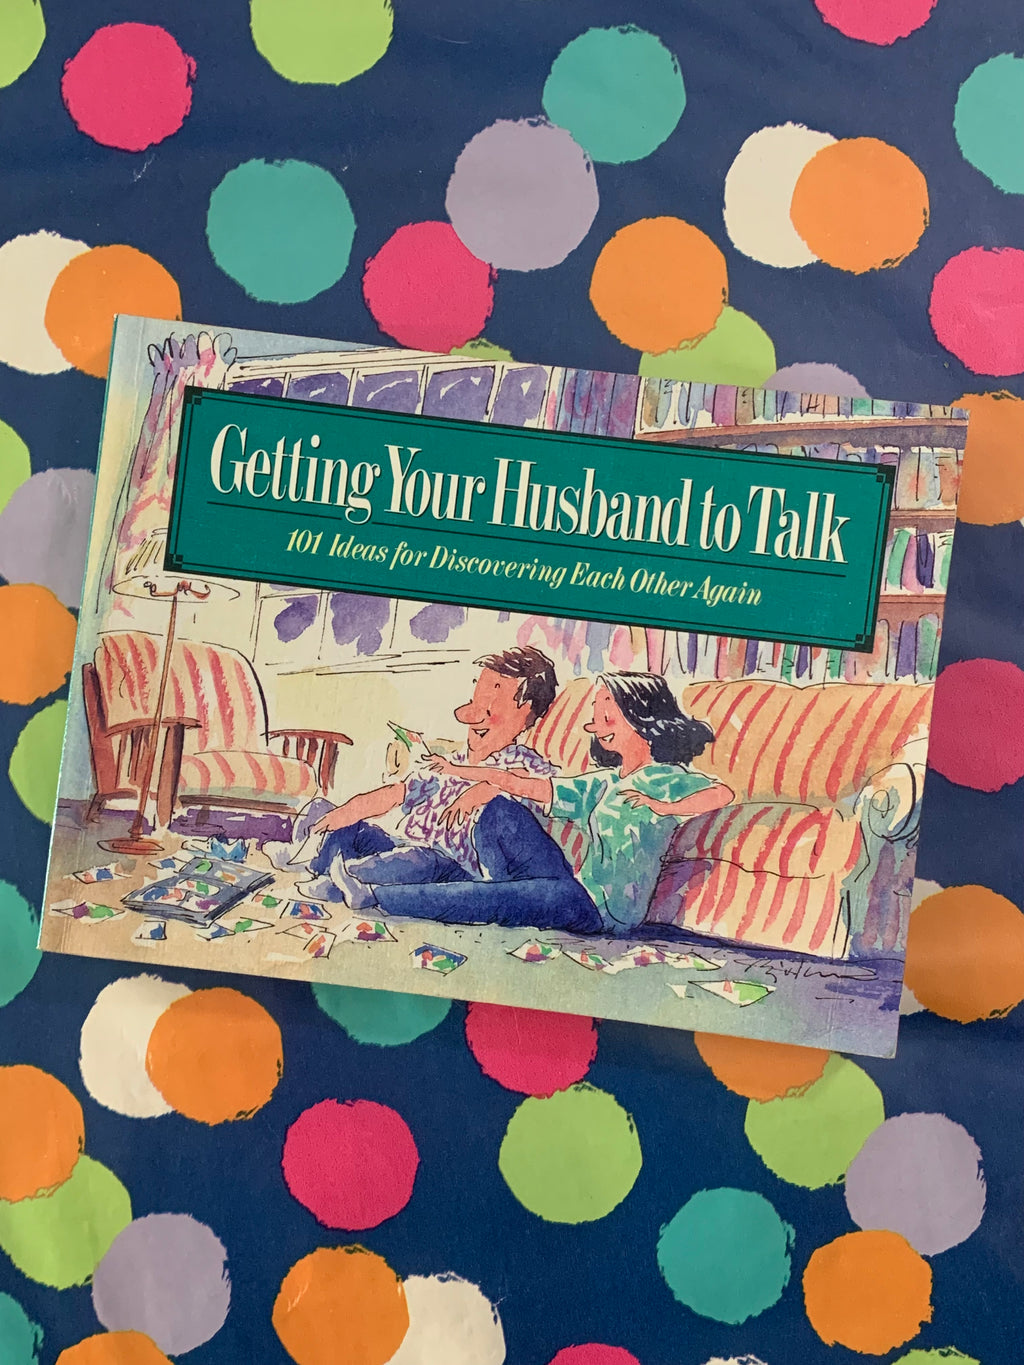 Getting Your Husband to Talk: 101 Ideas for Discovering Each Other Again- By Gail and Dave Veerman